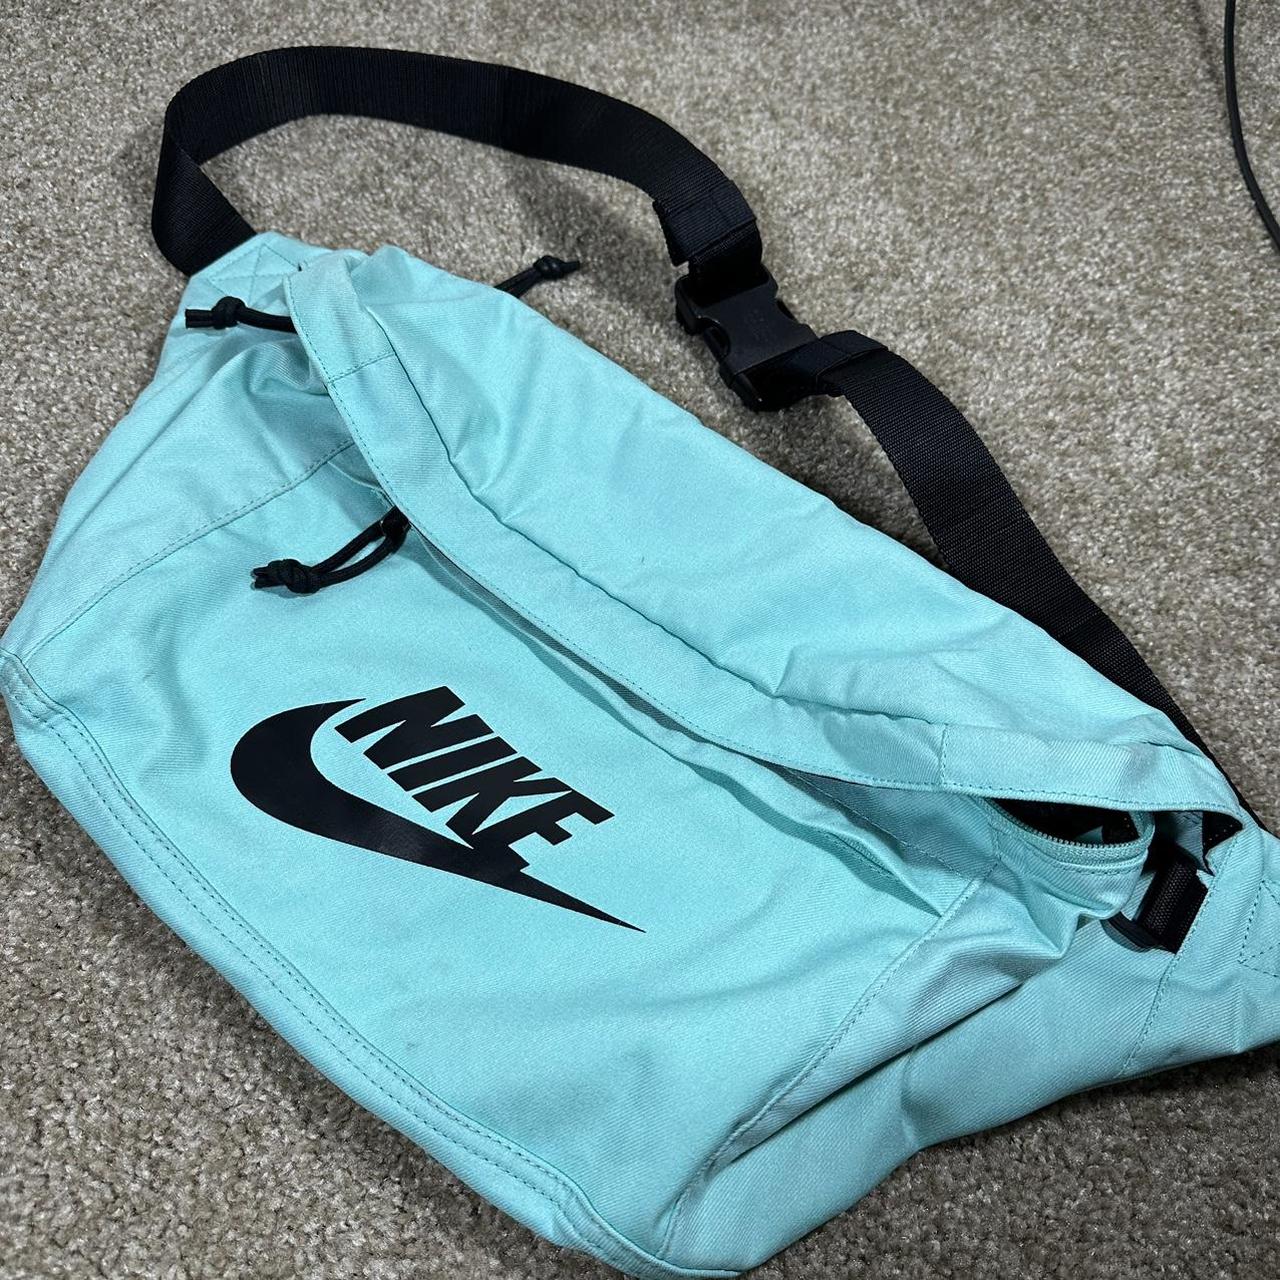 Nike Heritage fanny pack in blue